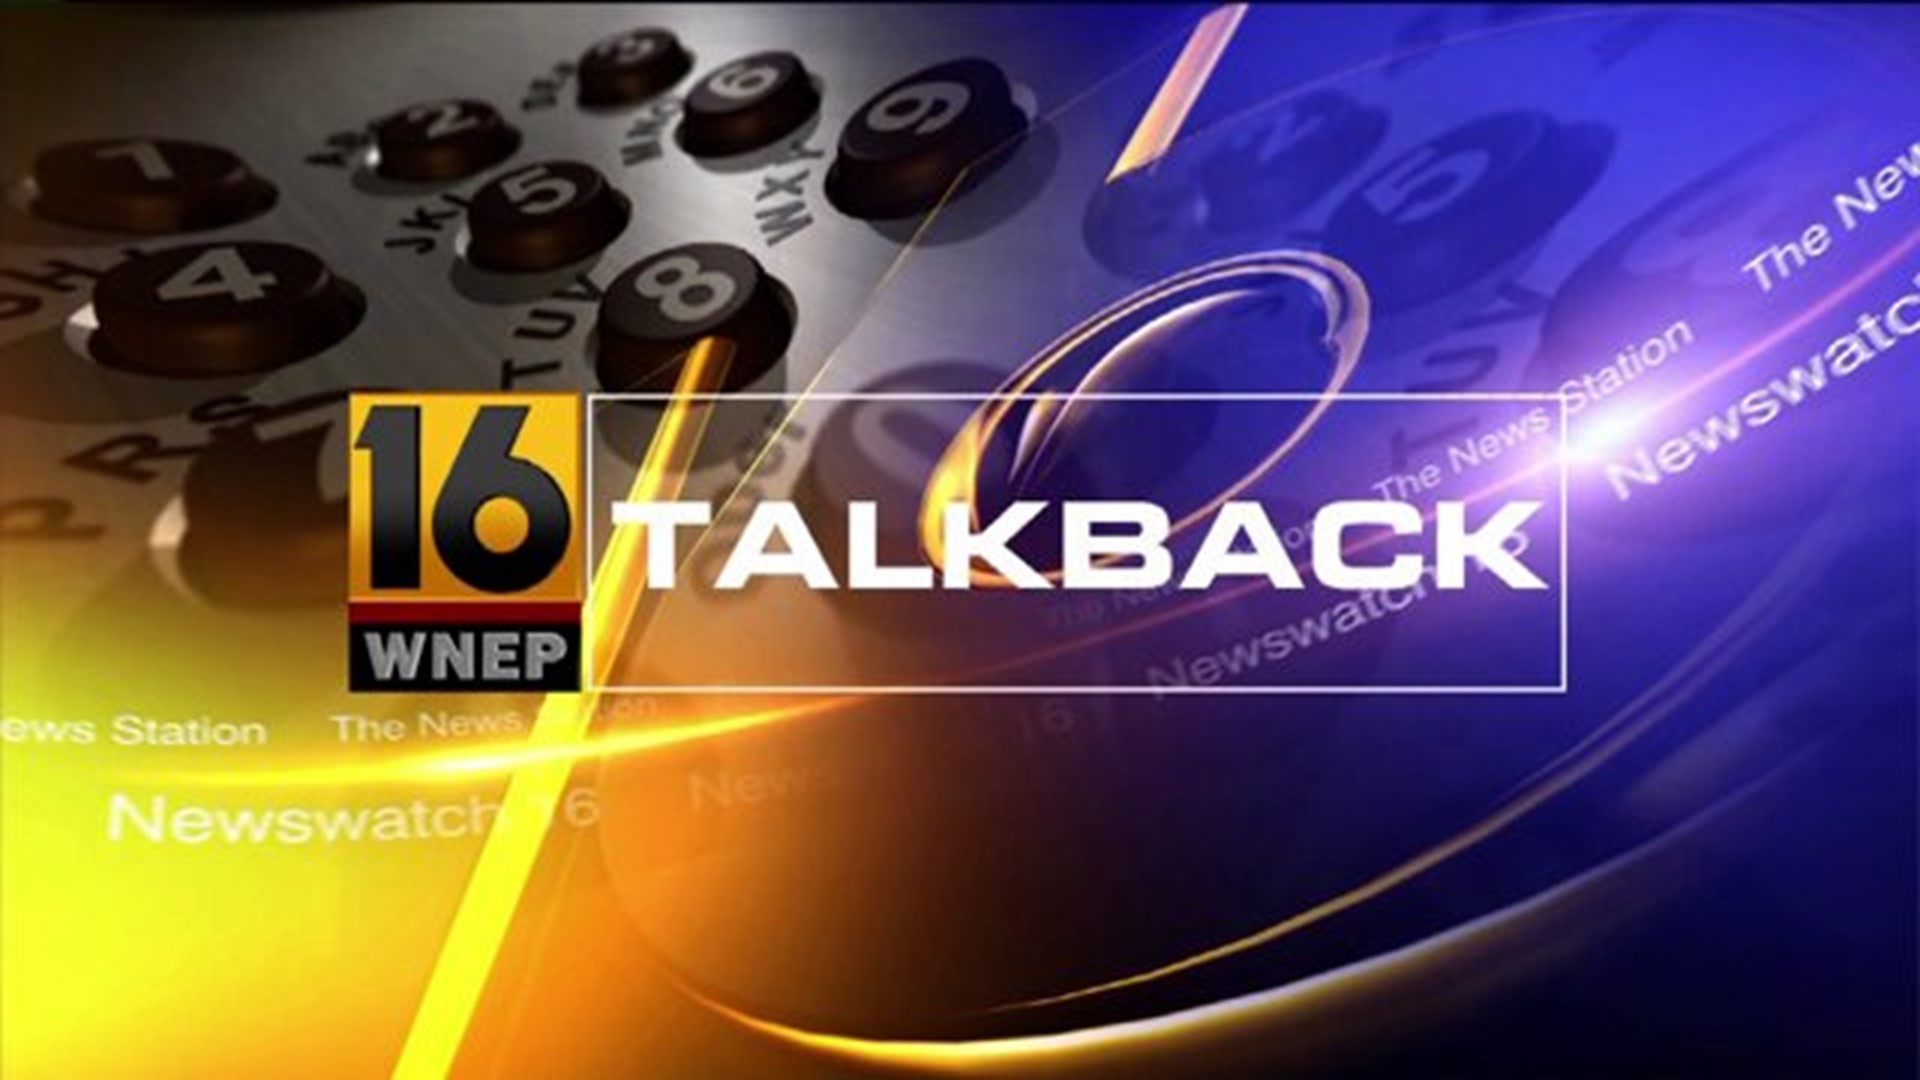 Talkback 16: Sex Charges Dropped, Concert Attendee Hit by Car, Doppler Radar